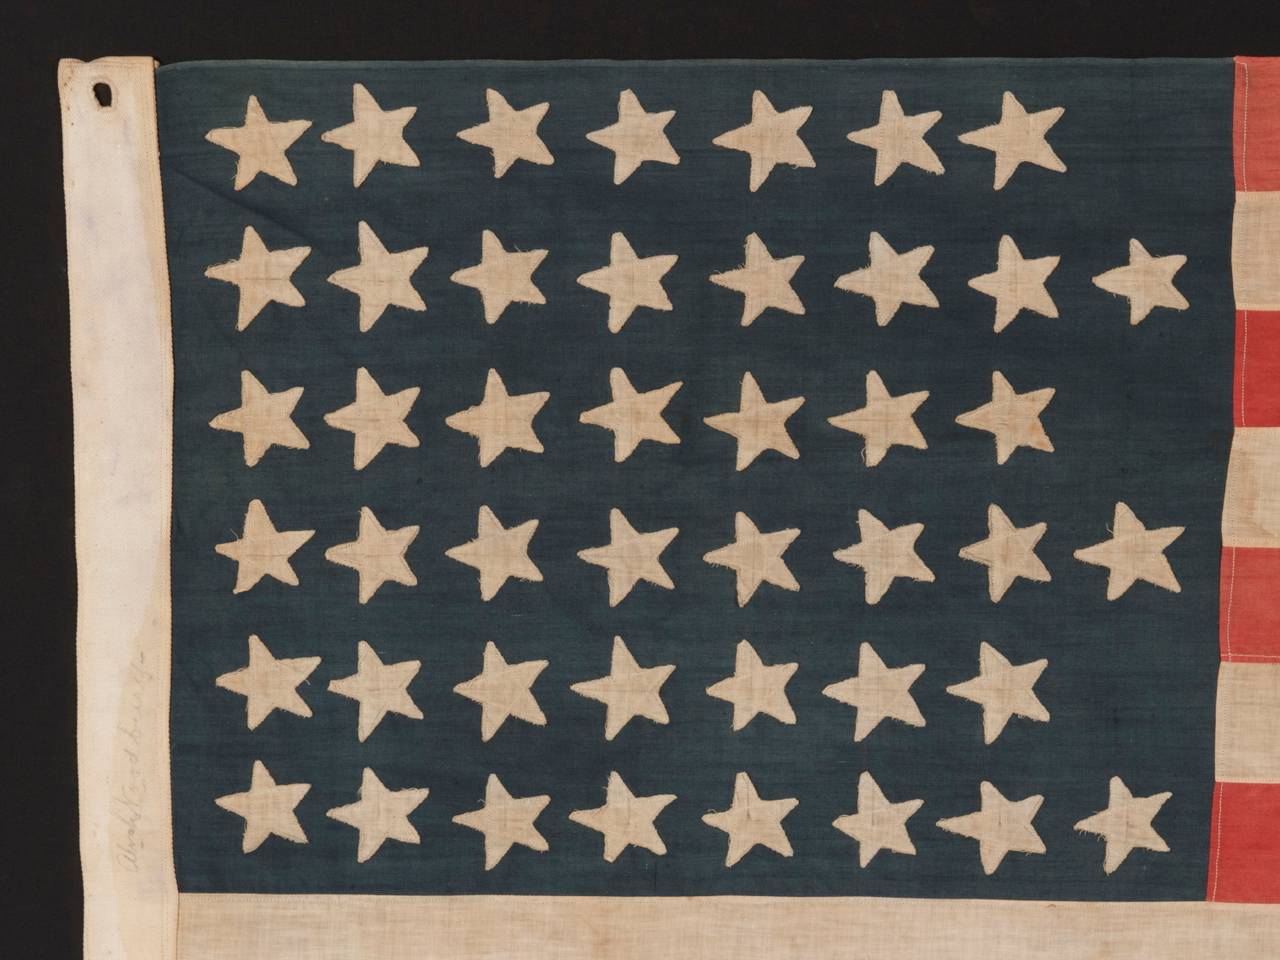 American 45 Star Flag with Stars in a 